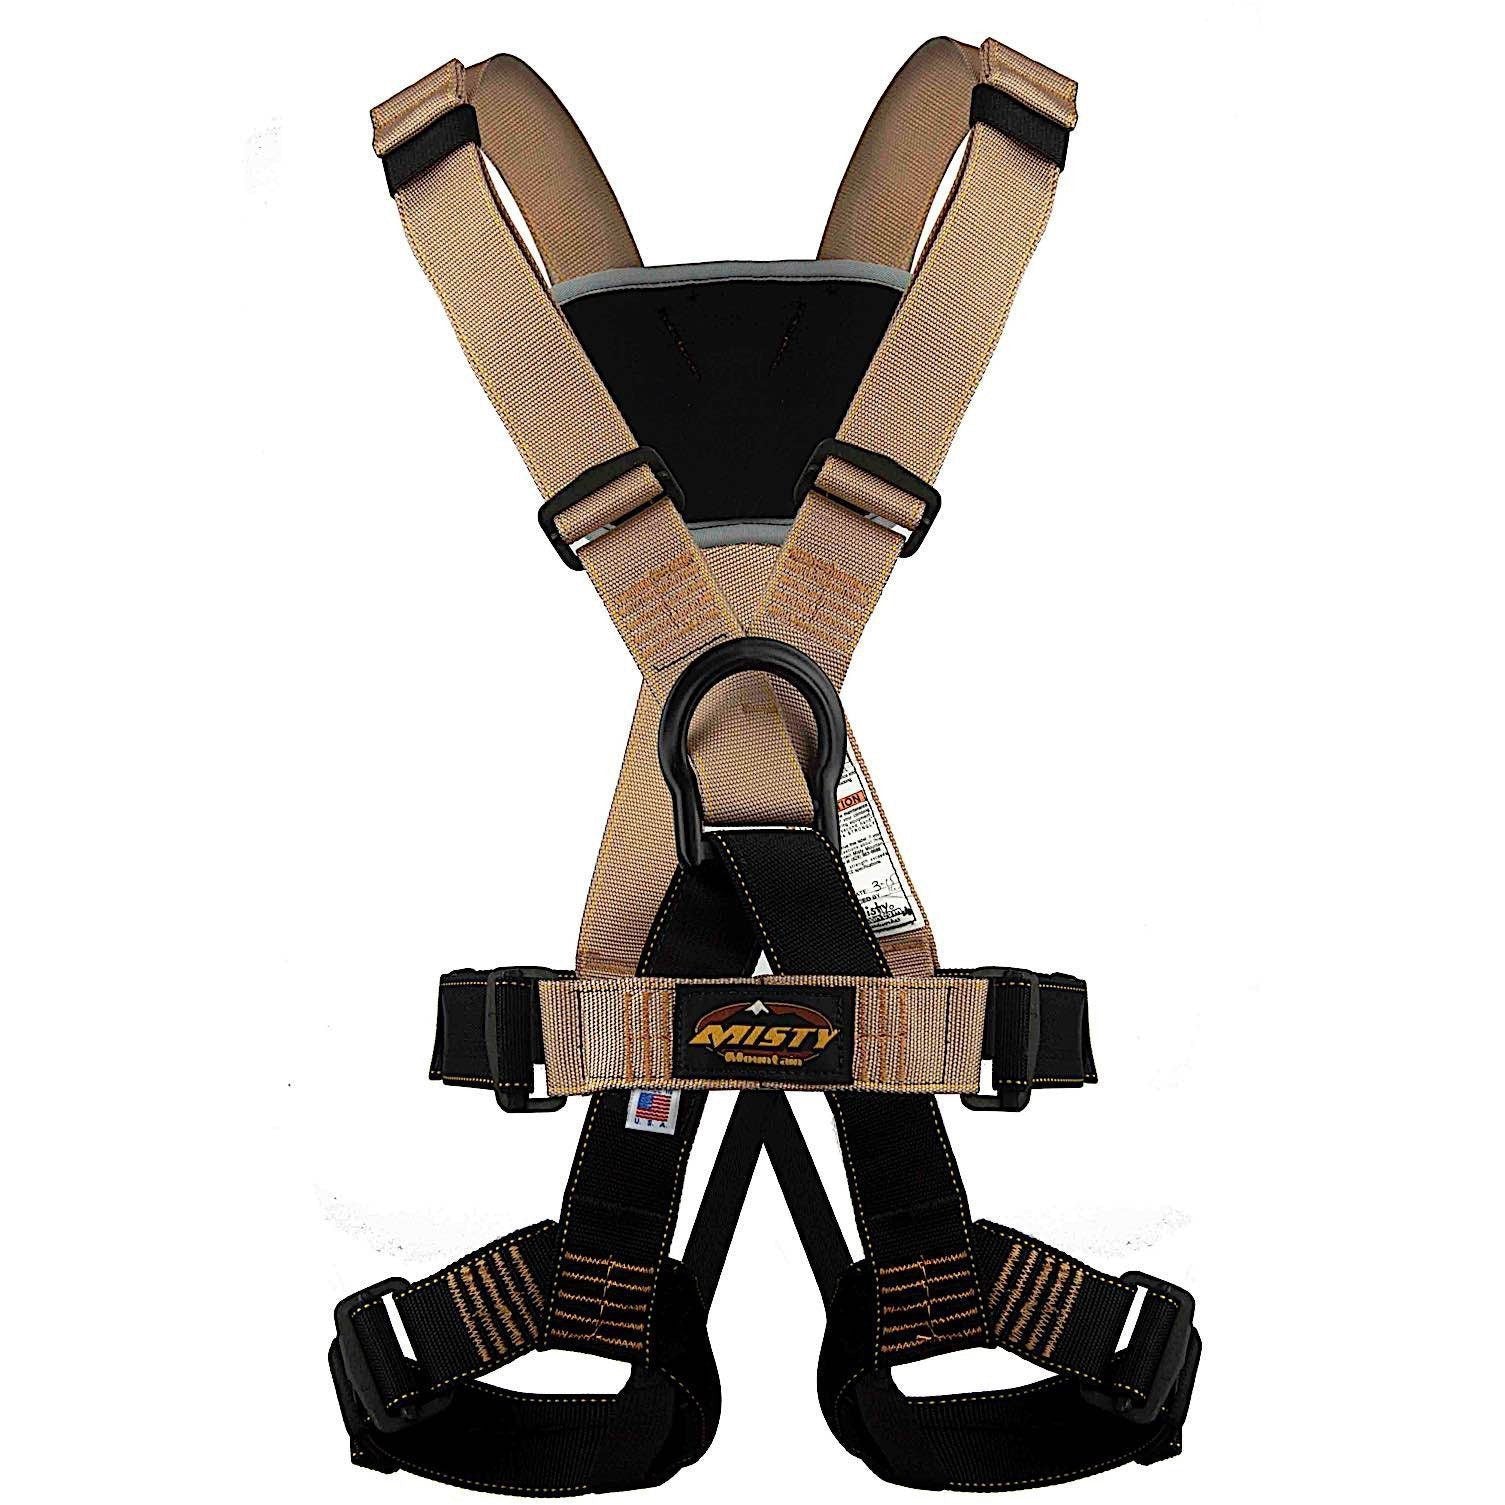 Misty Mountain High Country Full Body Harness - Aerial Adventure Tech